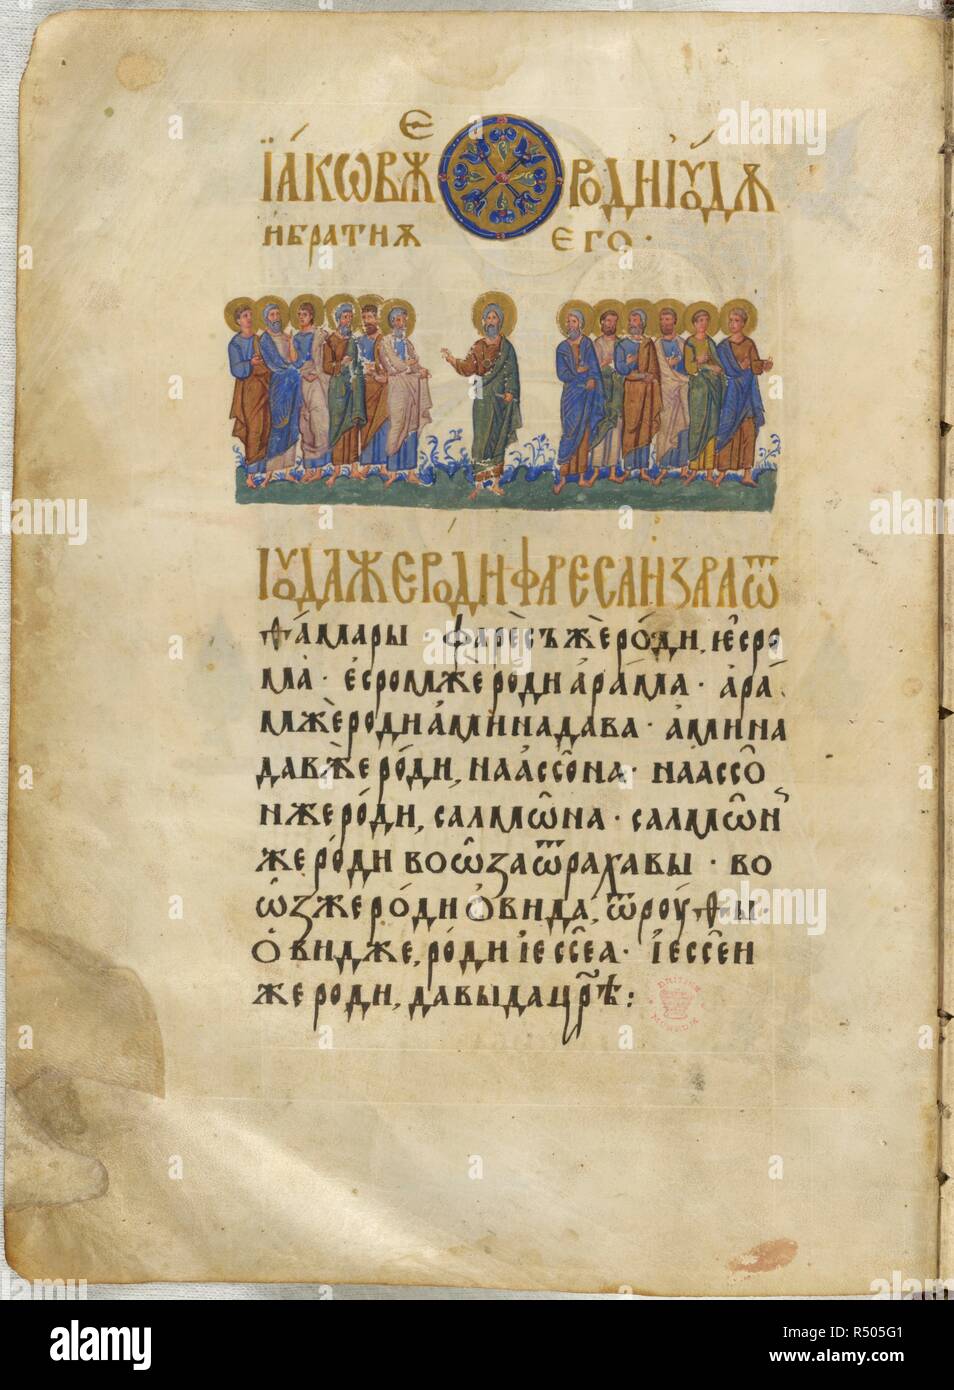 Jacob and his sons. The Gospels of Tsar Ivan Alexander. Turnovo, 1355-1356. (Whole folio) The genealogy of Christ; Jacob and his sons. Text  Image taken from The Gospels of Tsar Ivan Alexander.  Originally published/produced in Turnovo, 1355-1356. . Source: Add. 39627, f.6v. Language: Bulgarian Church Slavonic. Author: SIMEON. Turnovo school. Stock Photo